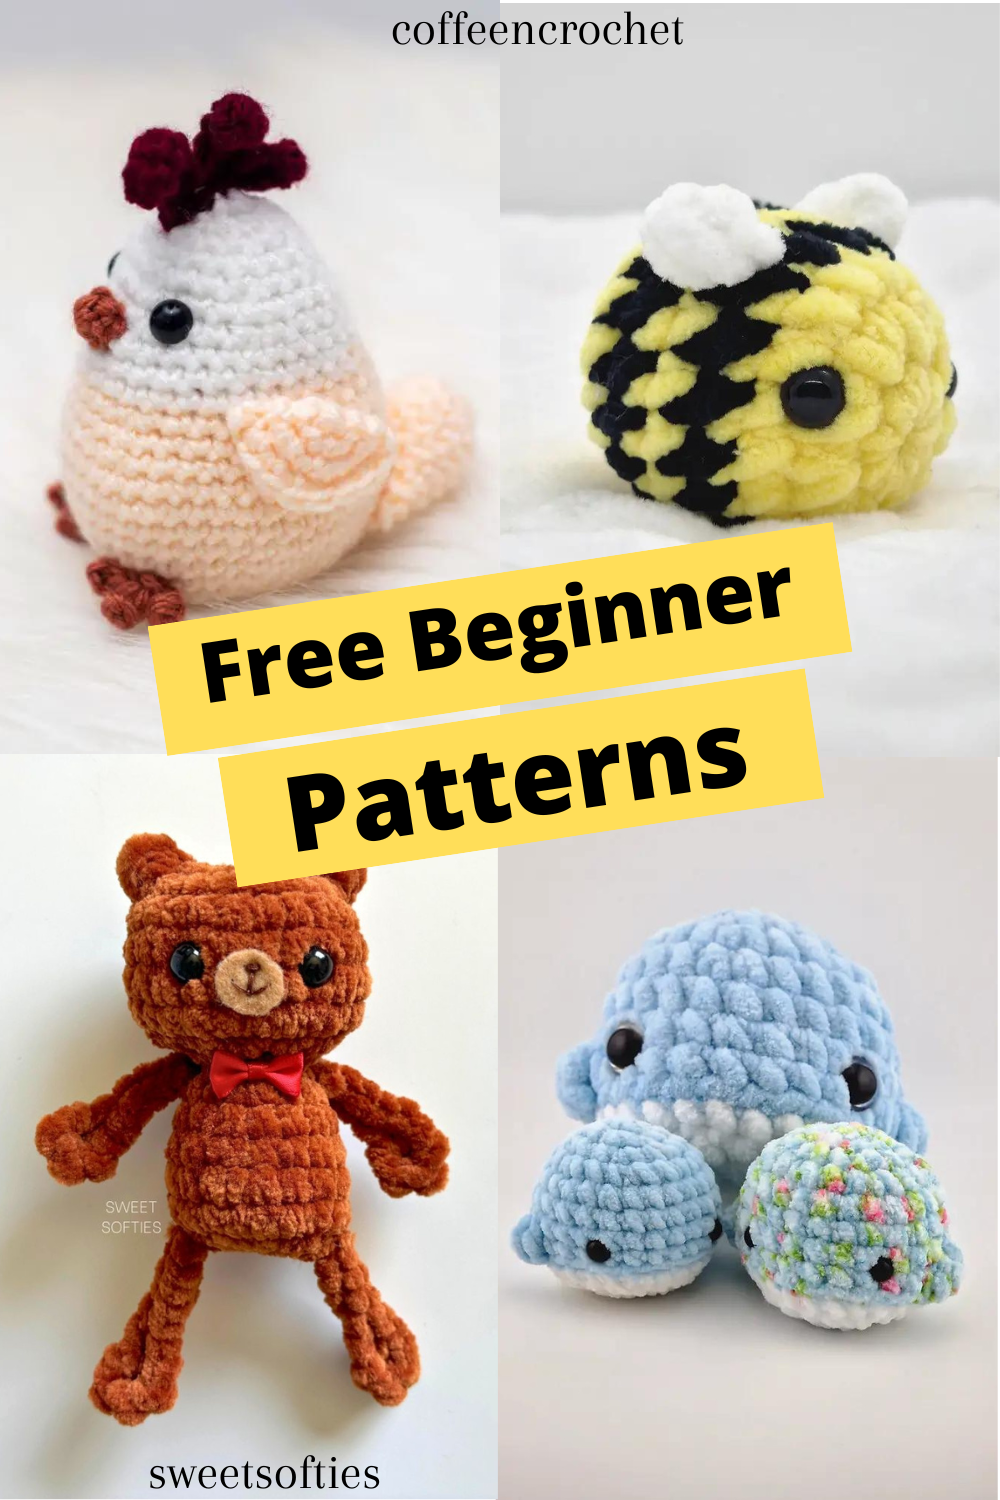 10 Free Beginner Crochet Patterns You Have to Try #2